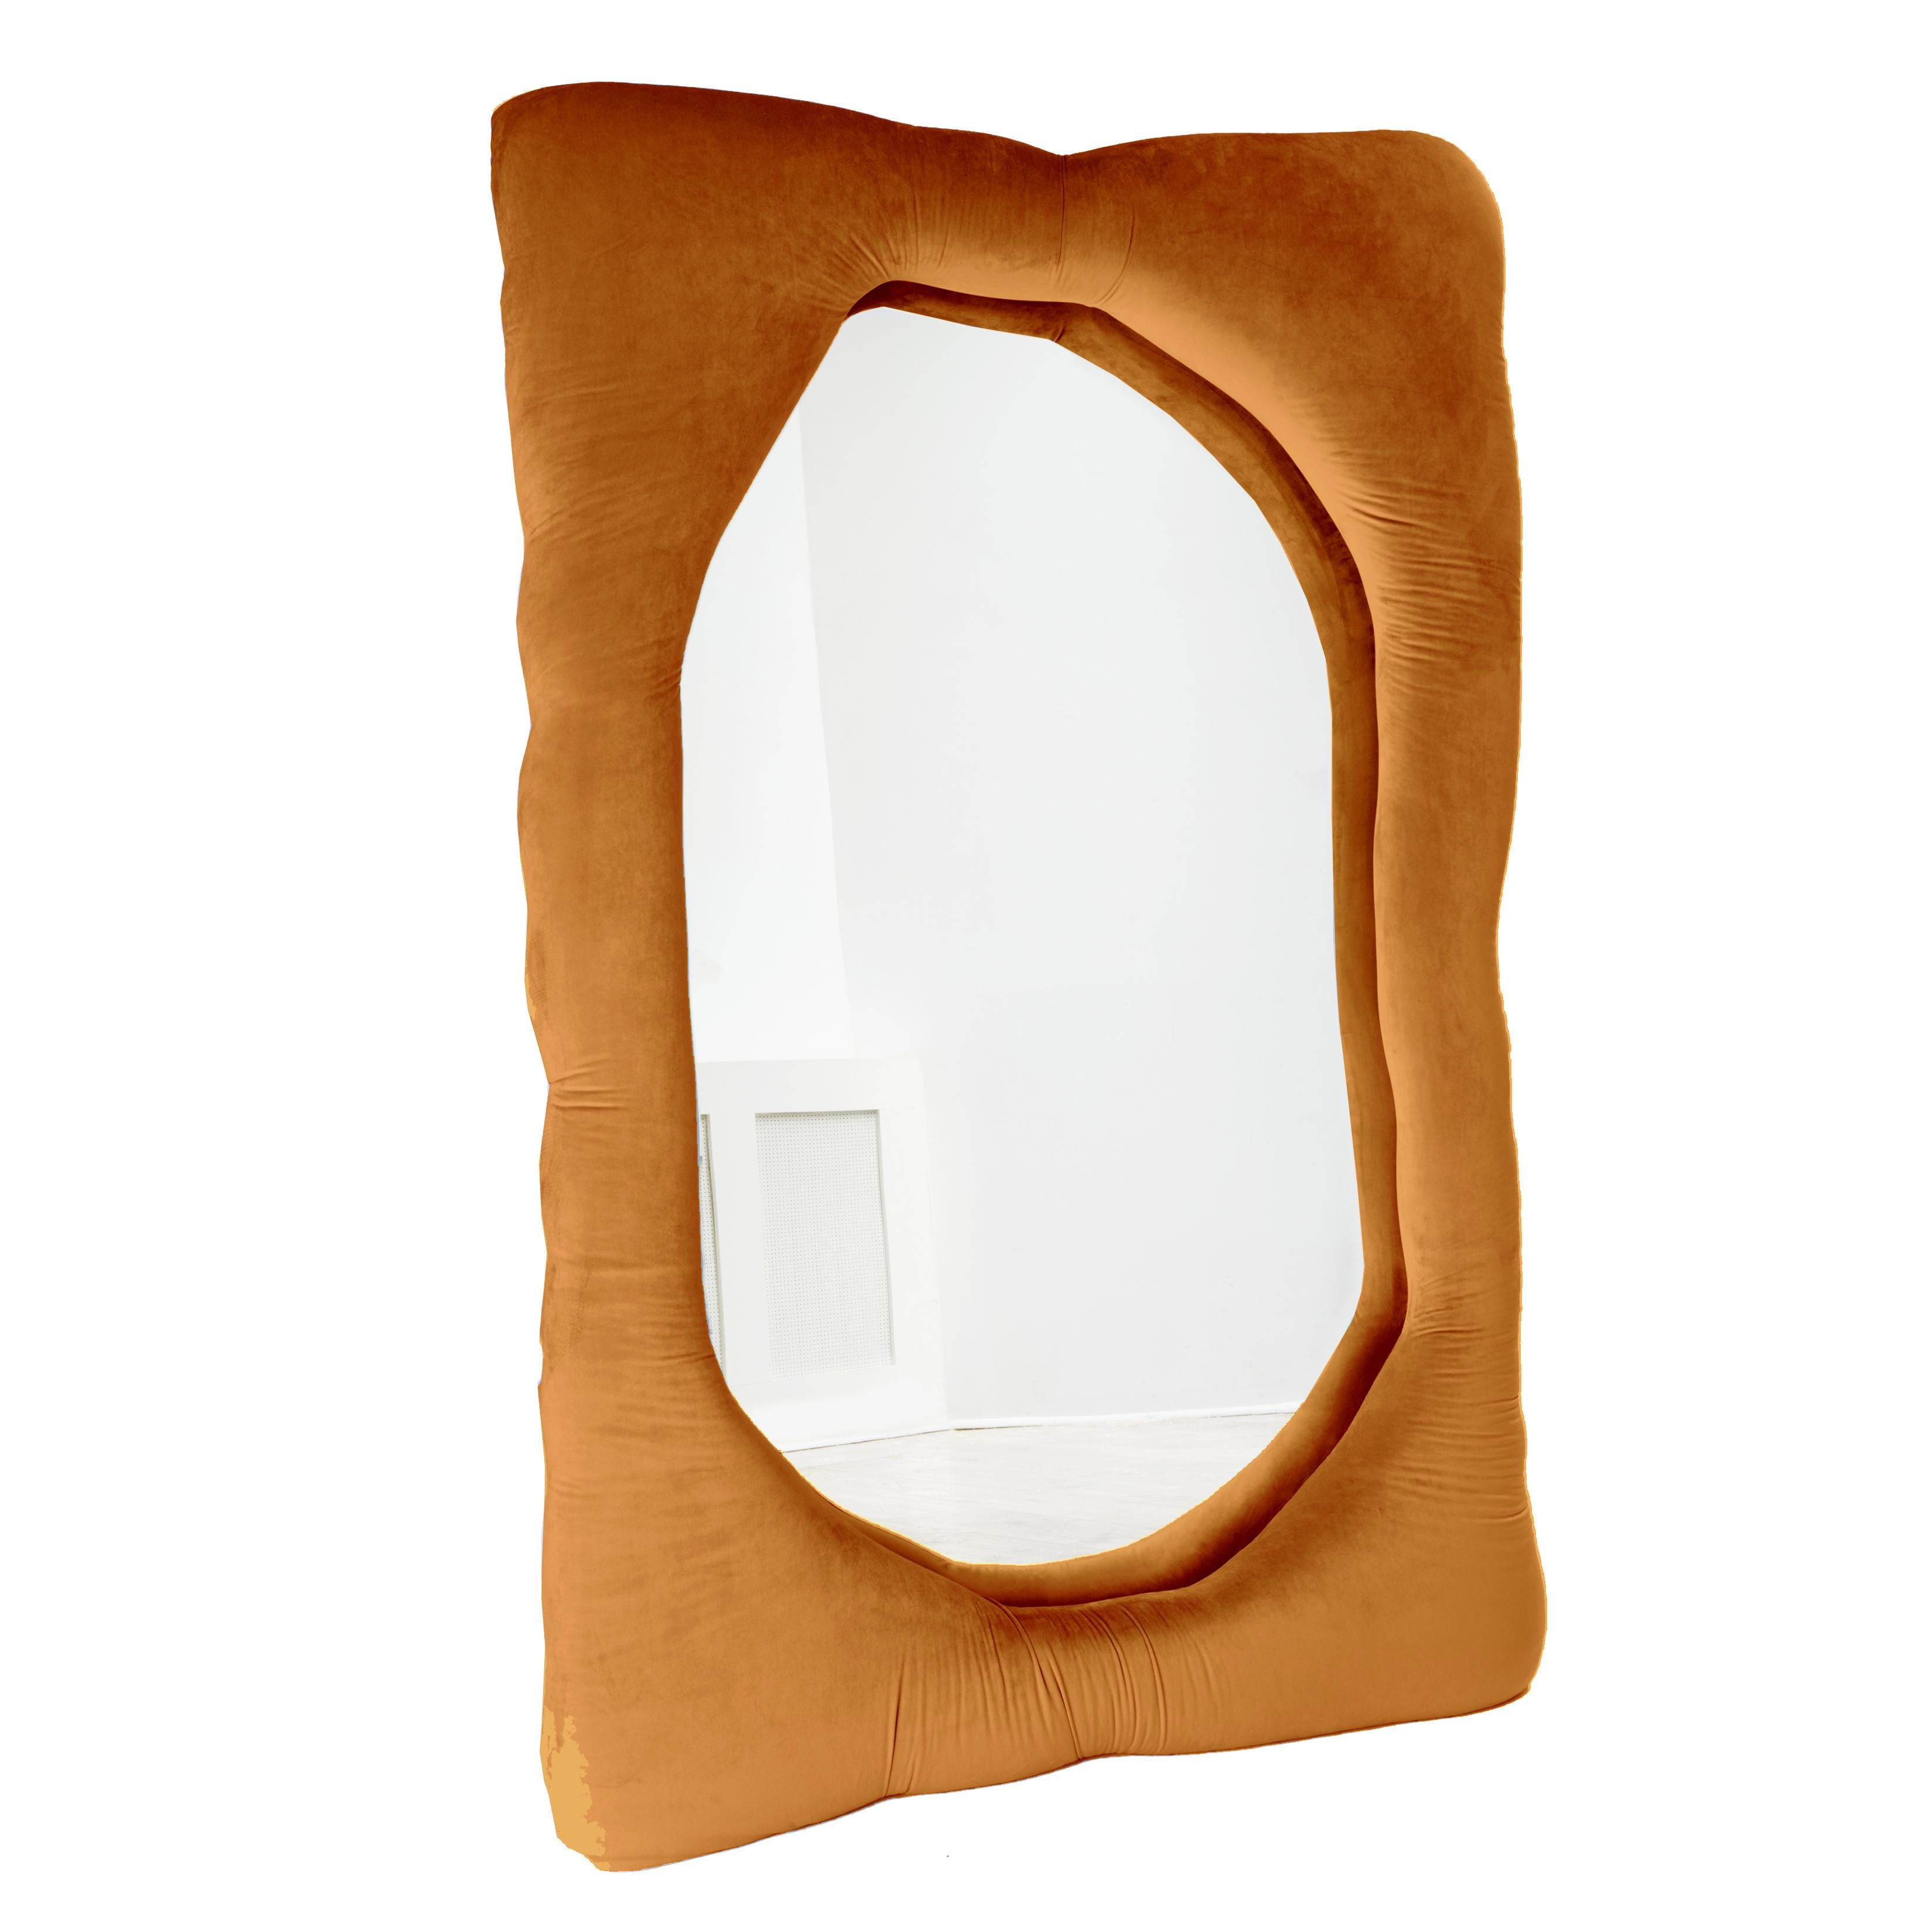 Biomorphic mirror by Brandi Howe

Velvet fabric, glass, wood

Pictured: 68 x 45 x 5 in.

This mirror is fully customizable in multiple color, fabric and sizing options.

Other size available: 60 x 15 x 5 in.

Lead time for this item is 7-8 weeks.